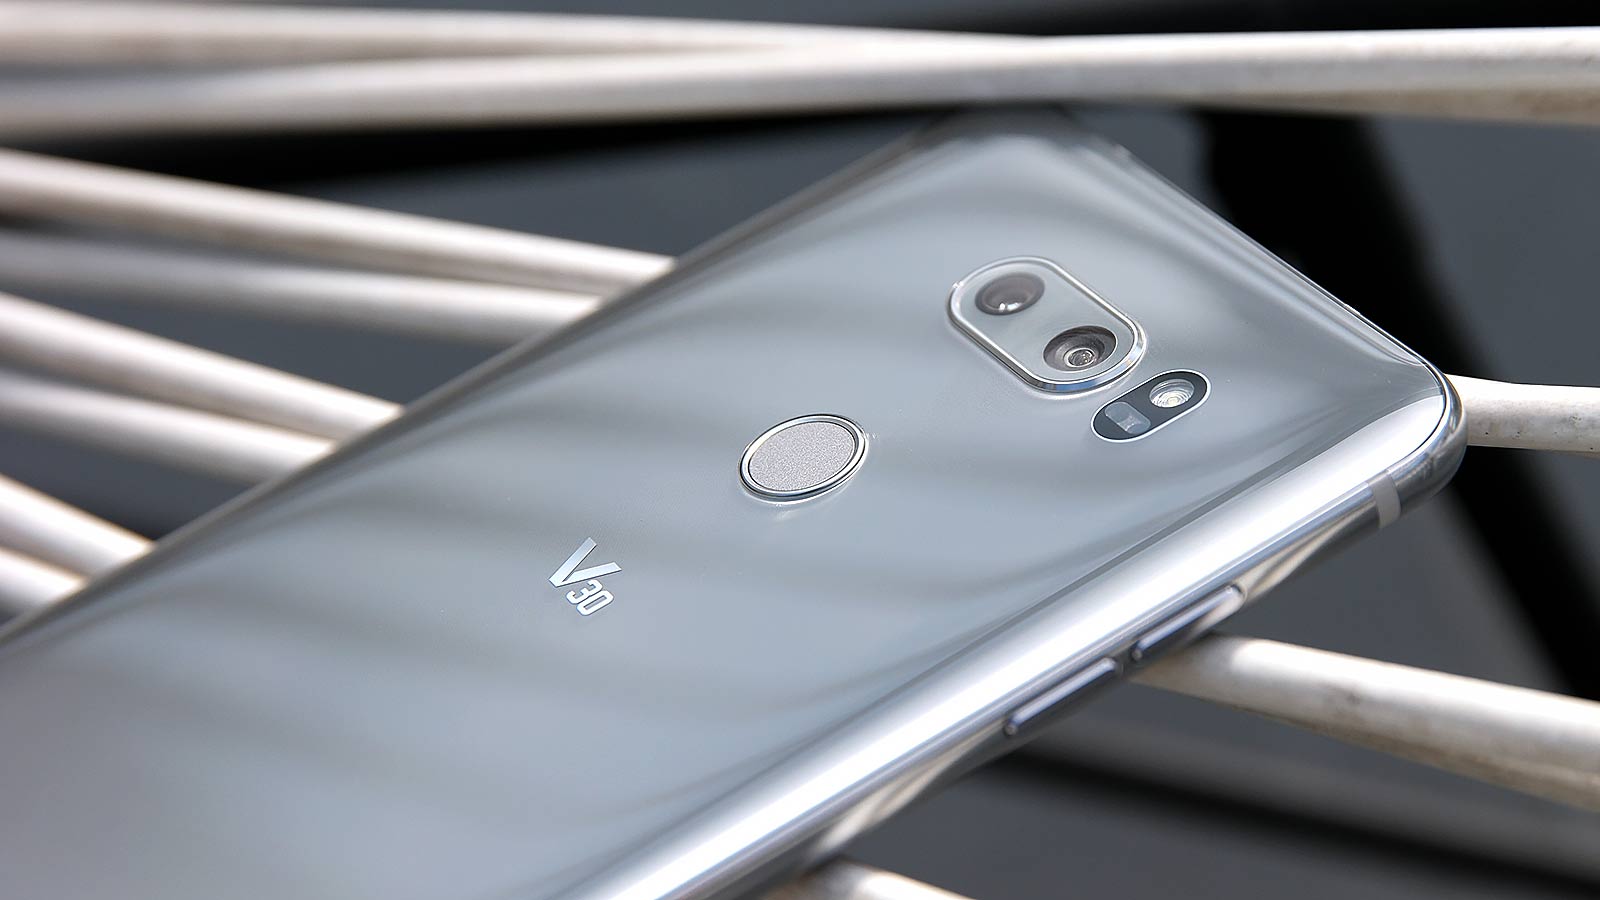 The LG V30 Sold Its Soul For Mainstream Appeal, But Hey, Its Camera And Audio Are Even Better